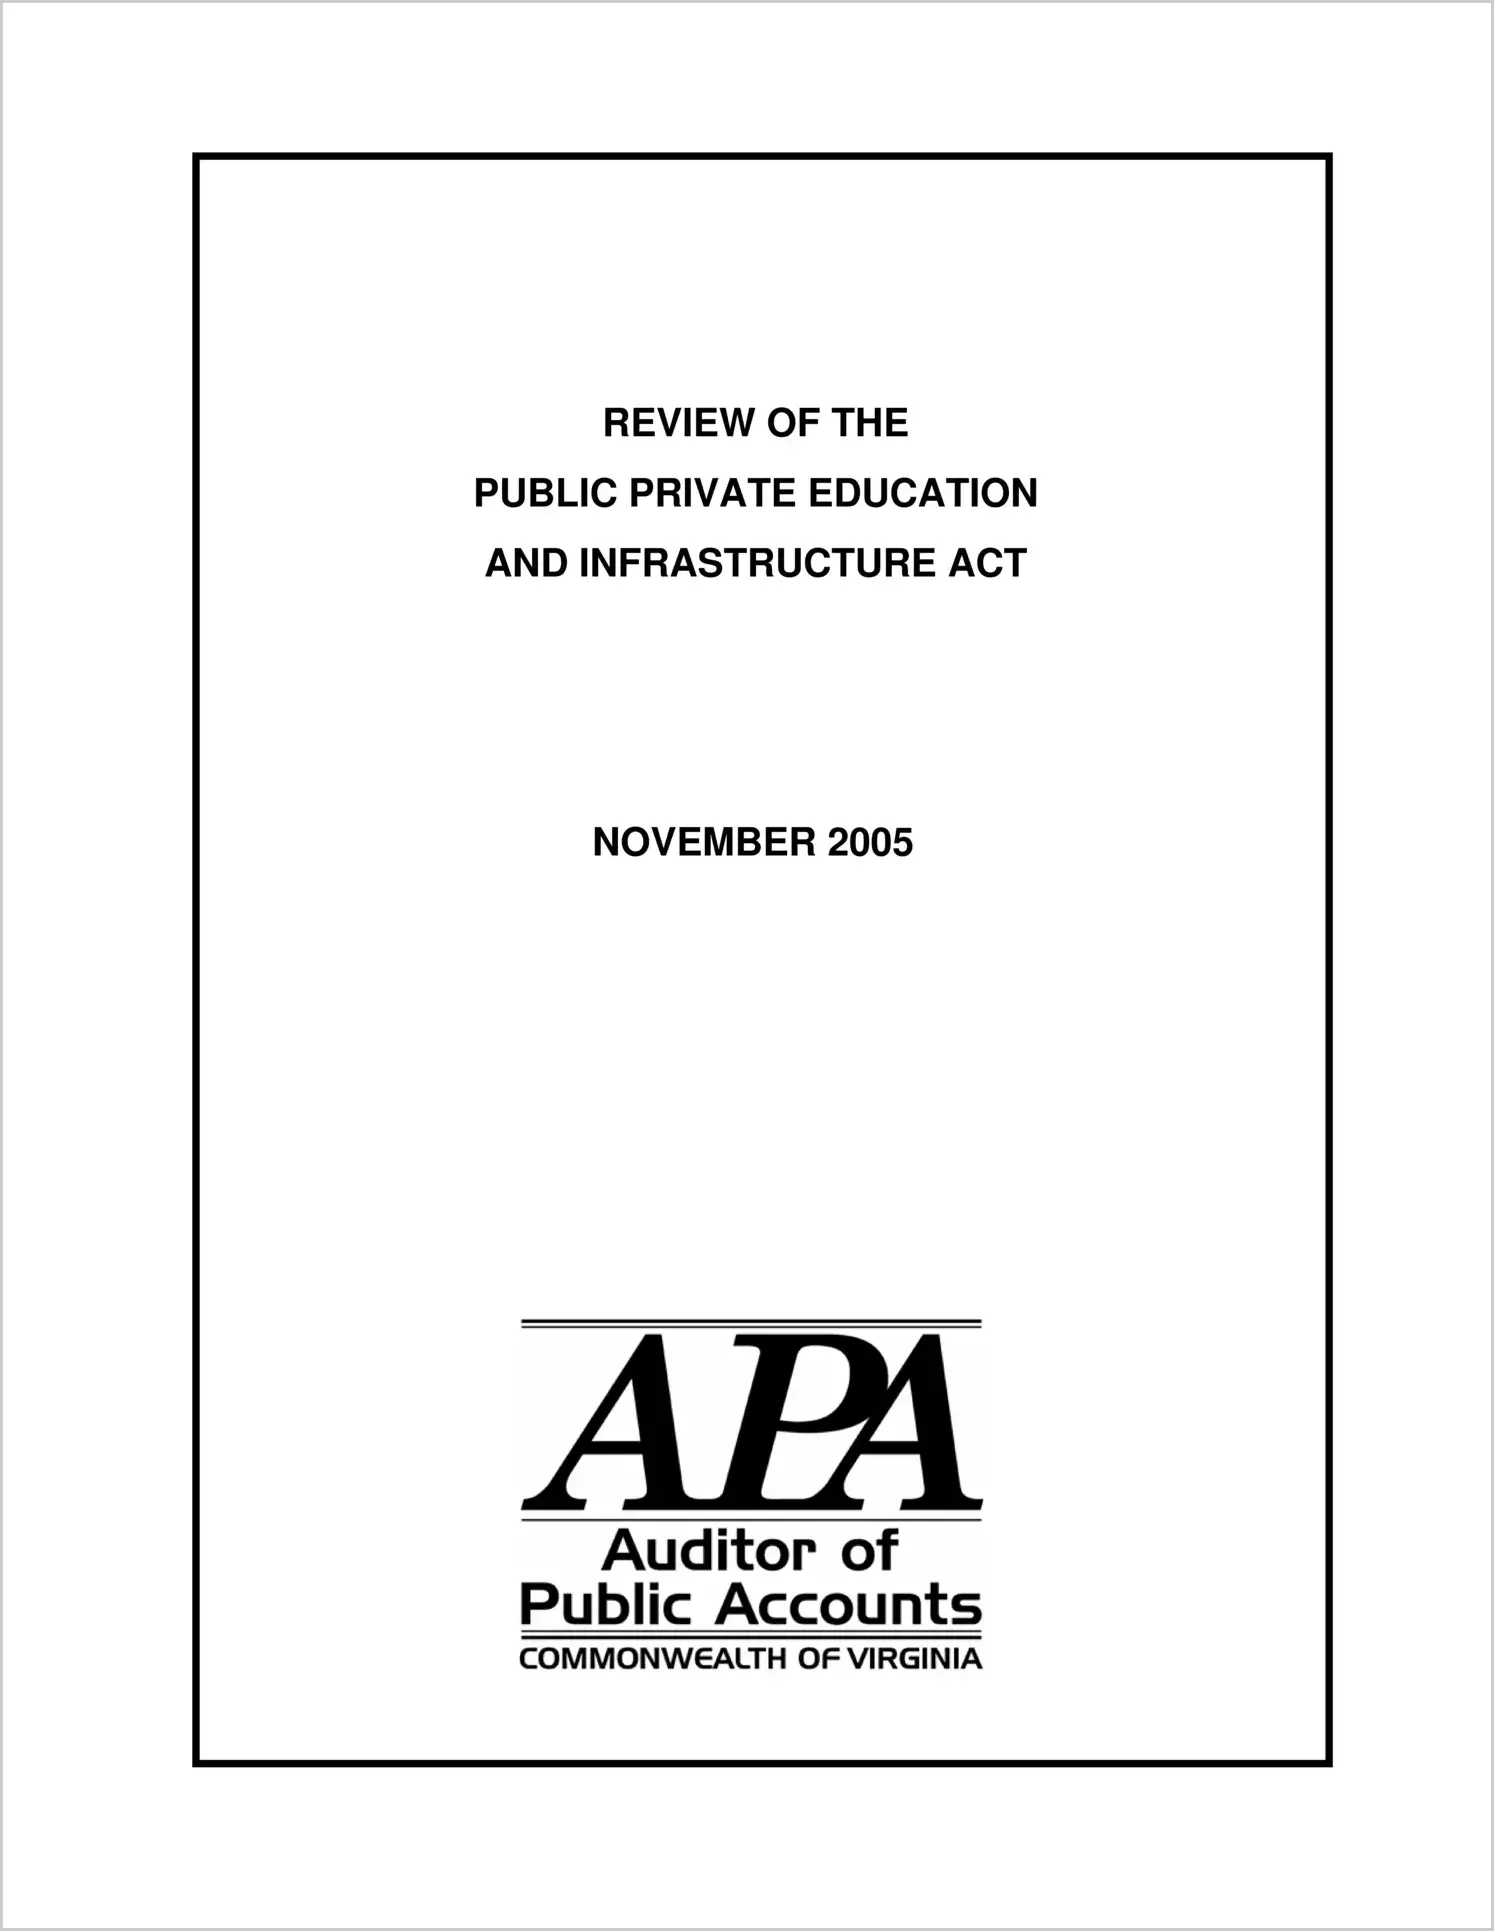 Review of the Public Private Education and Infrastructure Act, November 2005